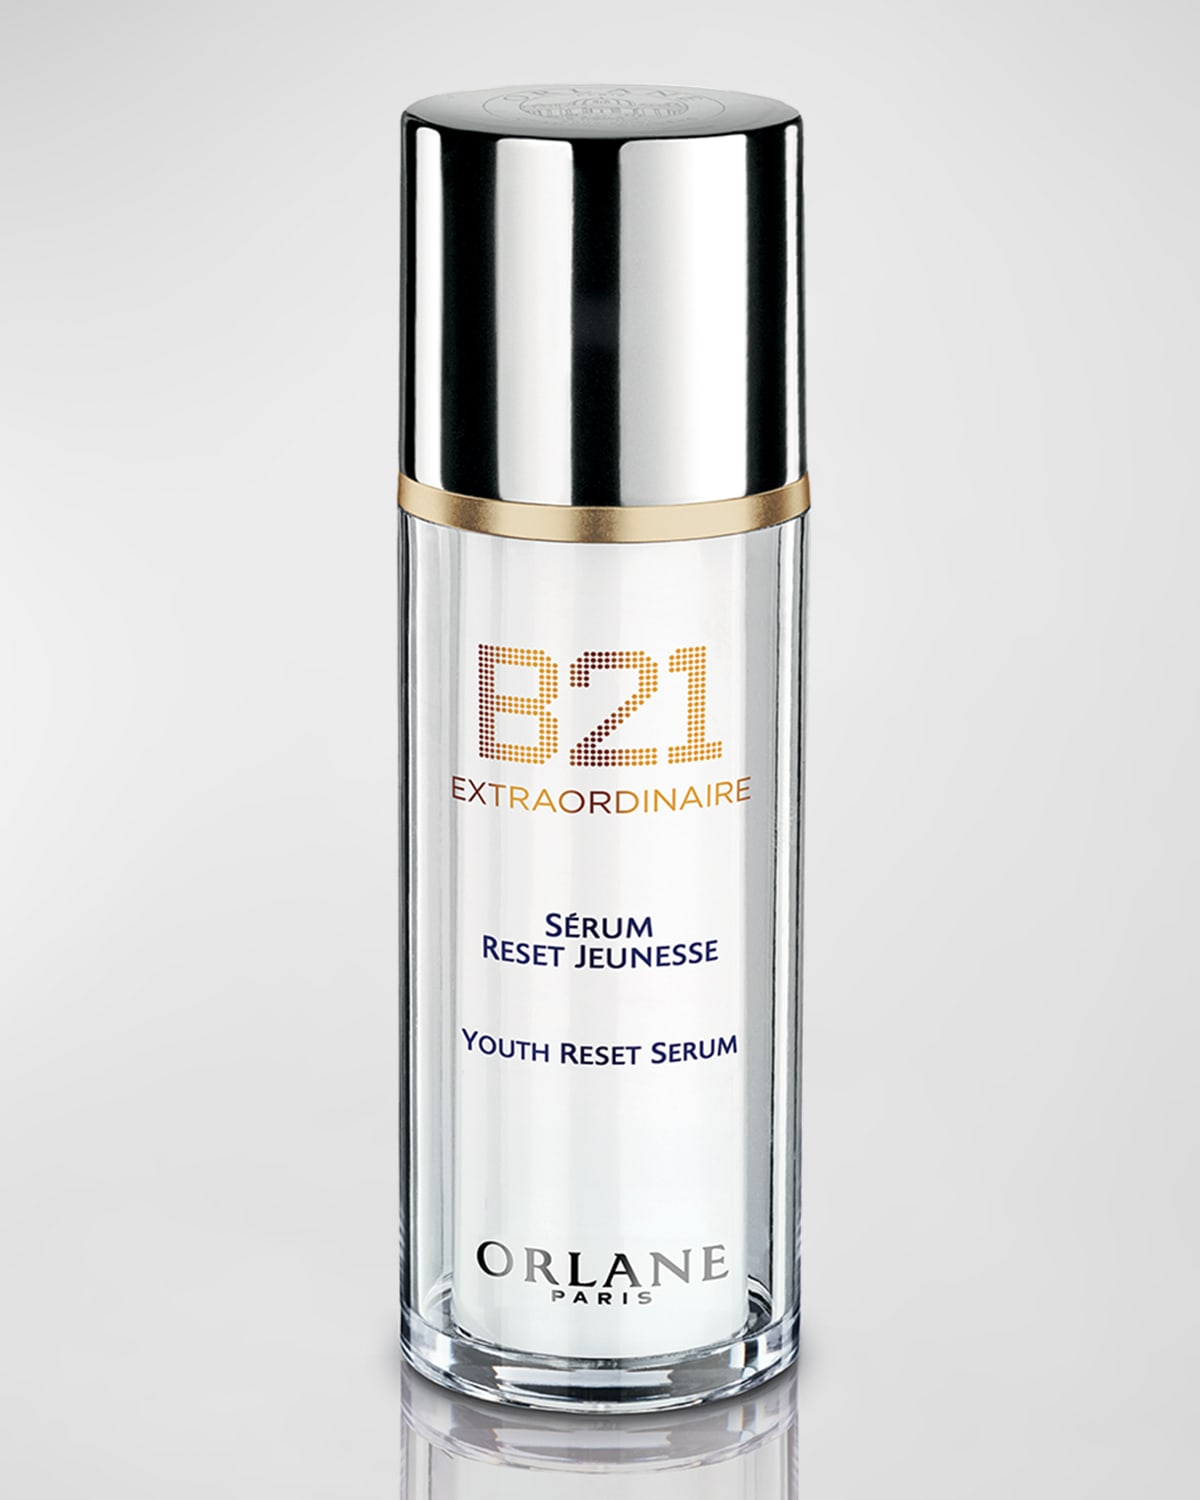 Shop Orlane Limited Edition B21 Extraordinaire Youth Reset Serum, 1.7 Oz.